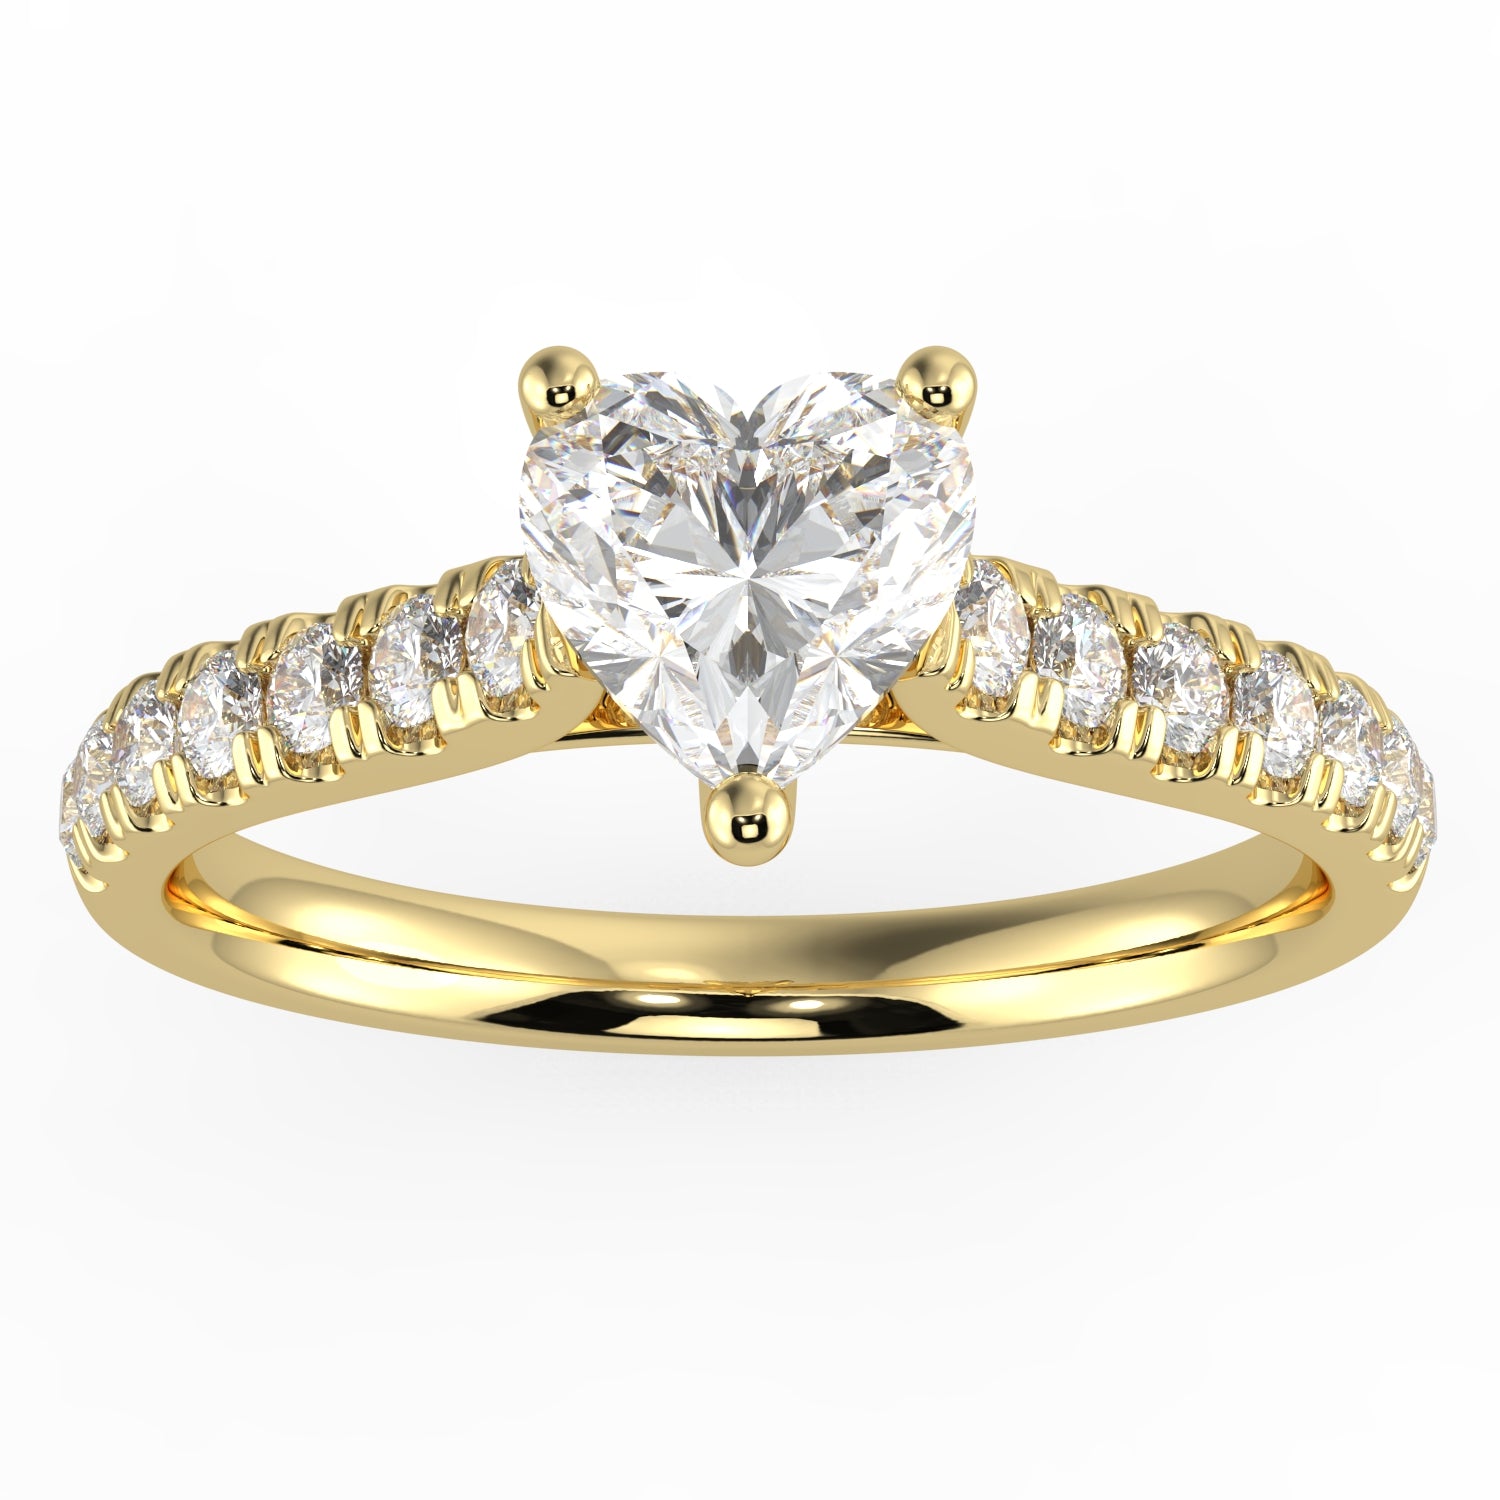 Natural Diamond Slim Shank Ring with 0.70ctw Heart Shape Center & 0.30 Round Side GHI1 Stones Set on 14K Gold